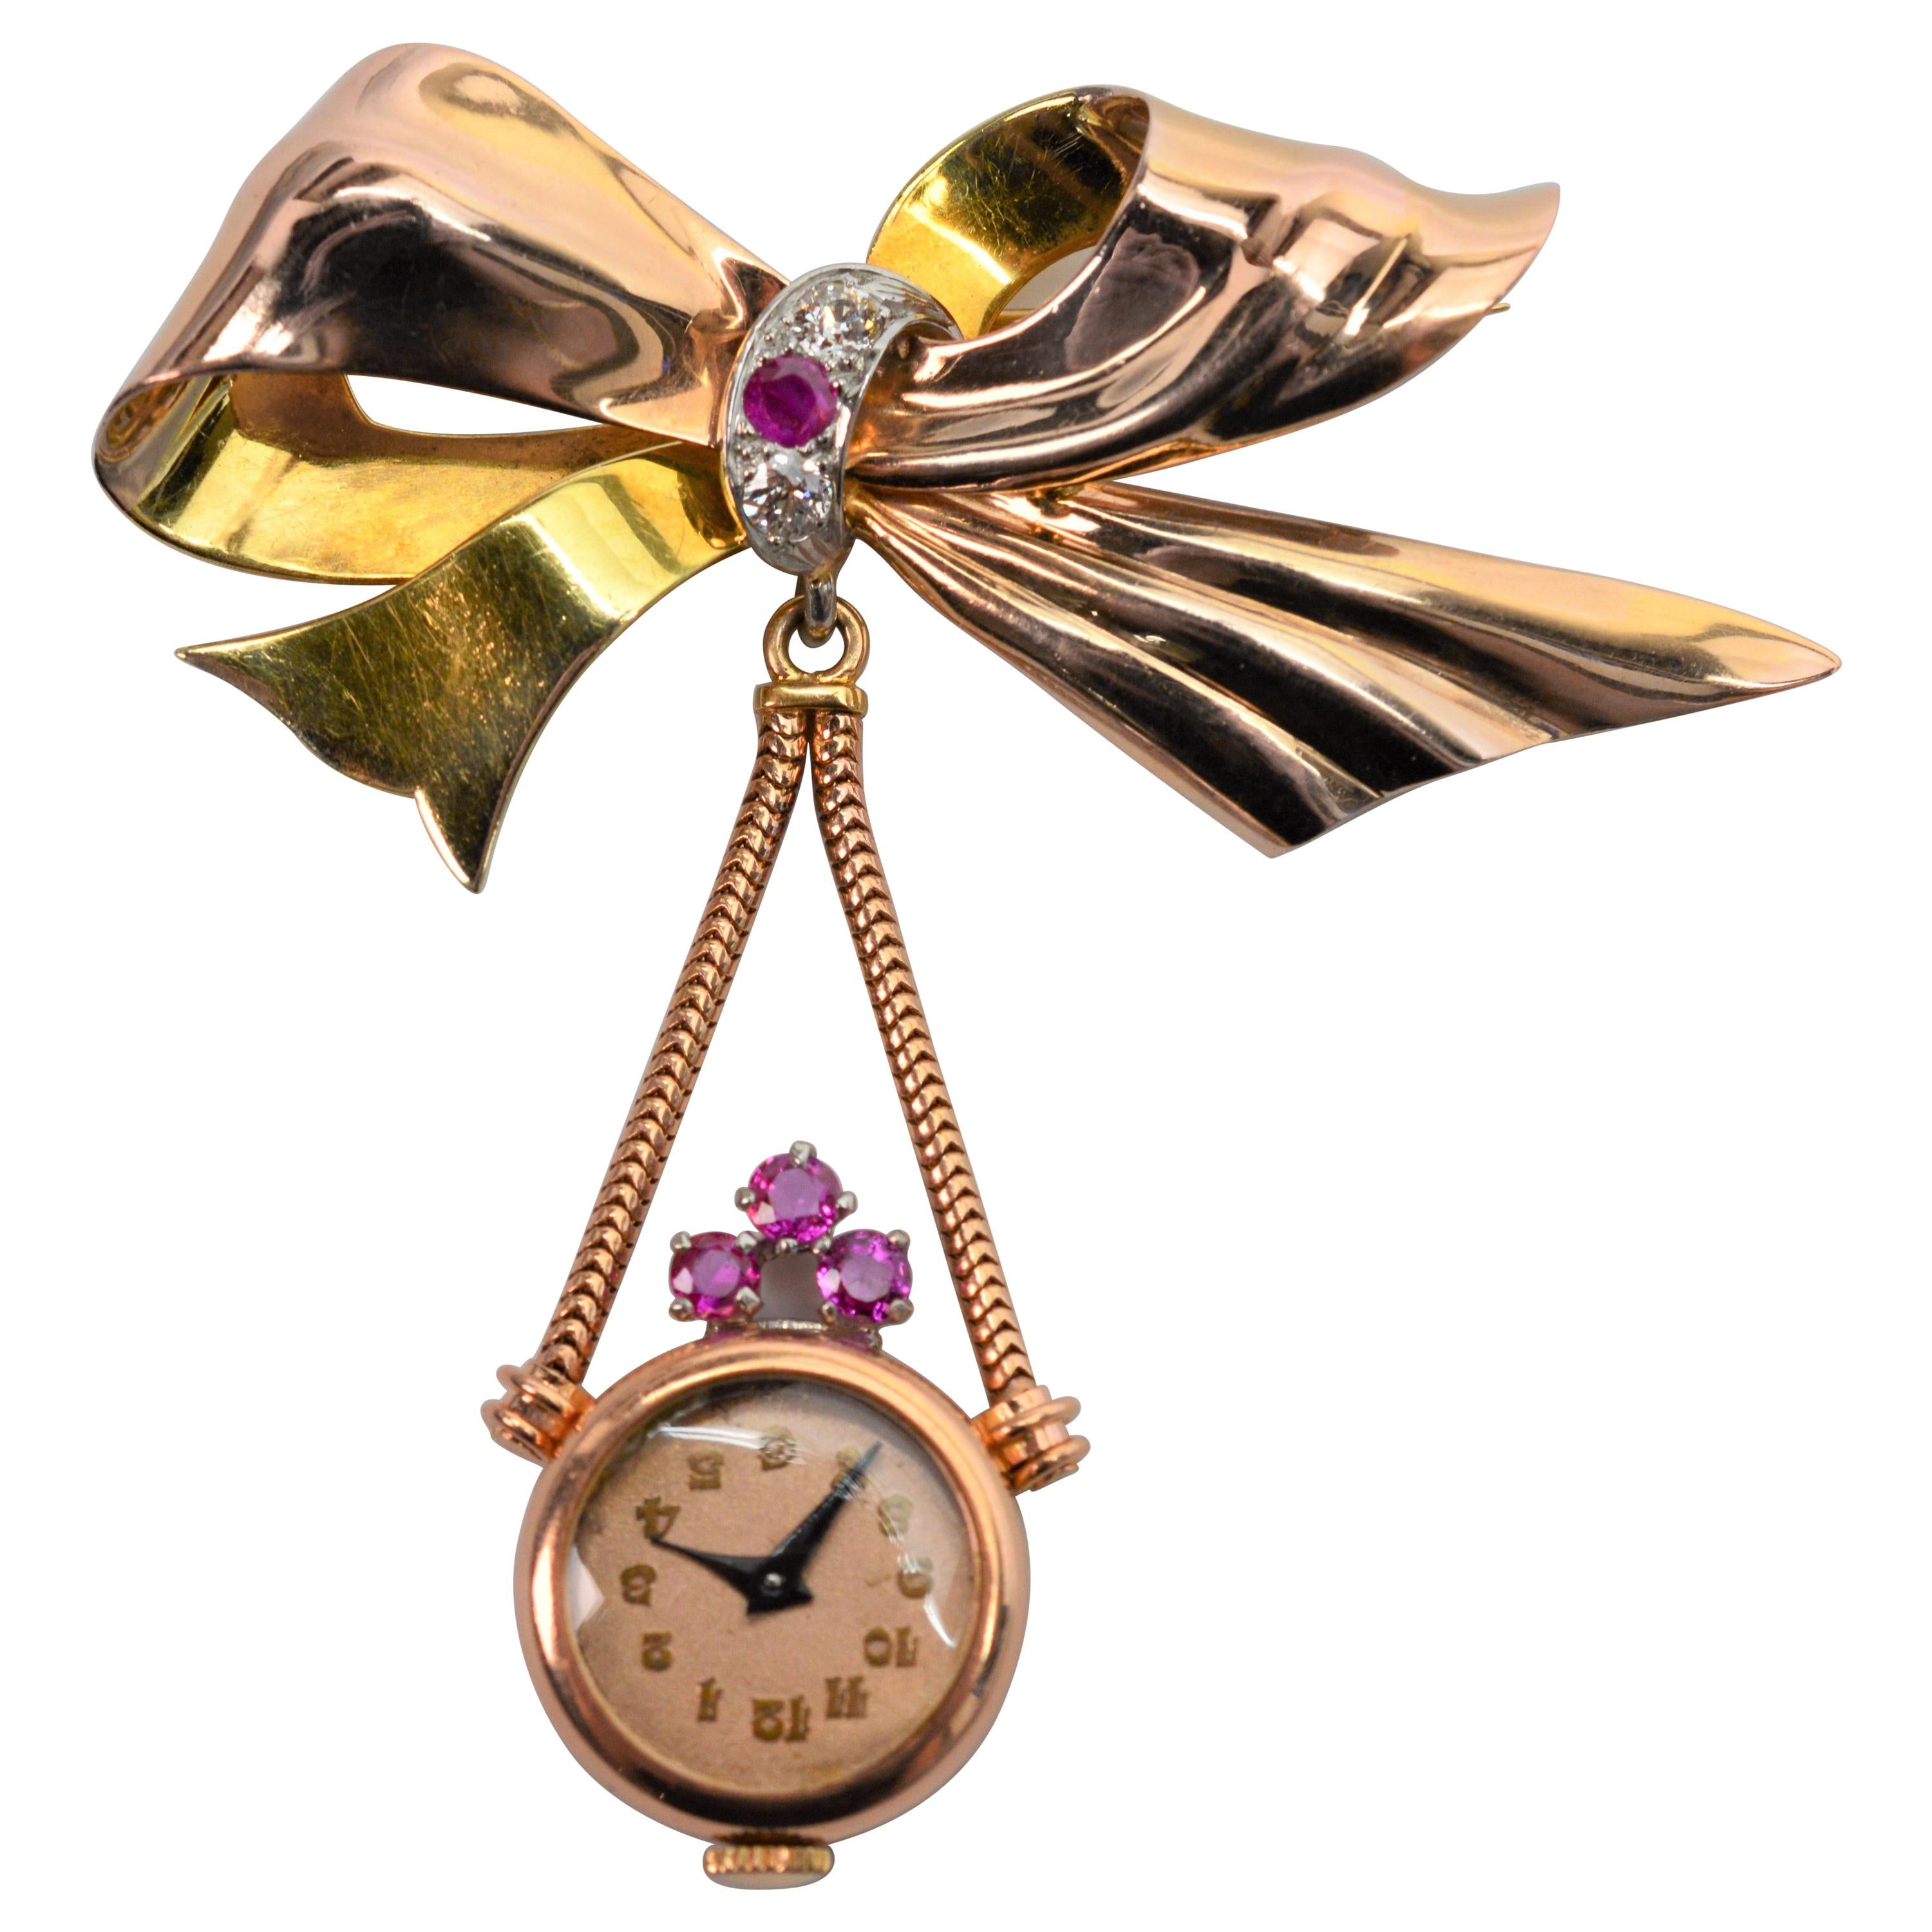 1950s Gold Pendant Watch Brooch with Rubies For Sale